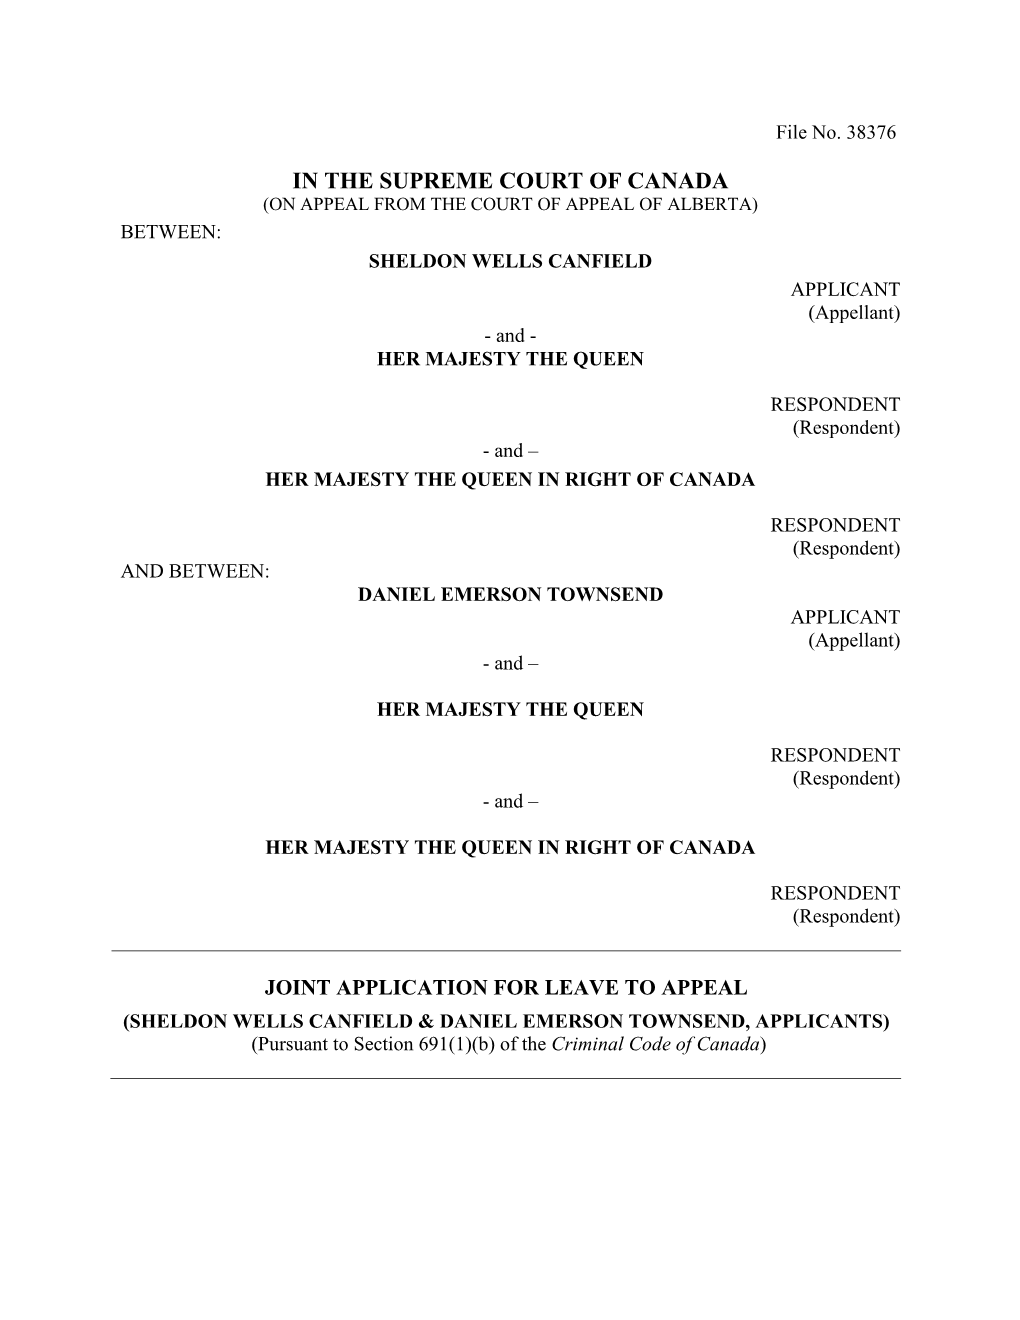 In the Supreme Court of Canada (On Appeal from the Court of Appeal of Alberta)